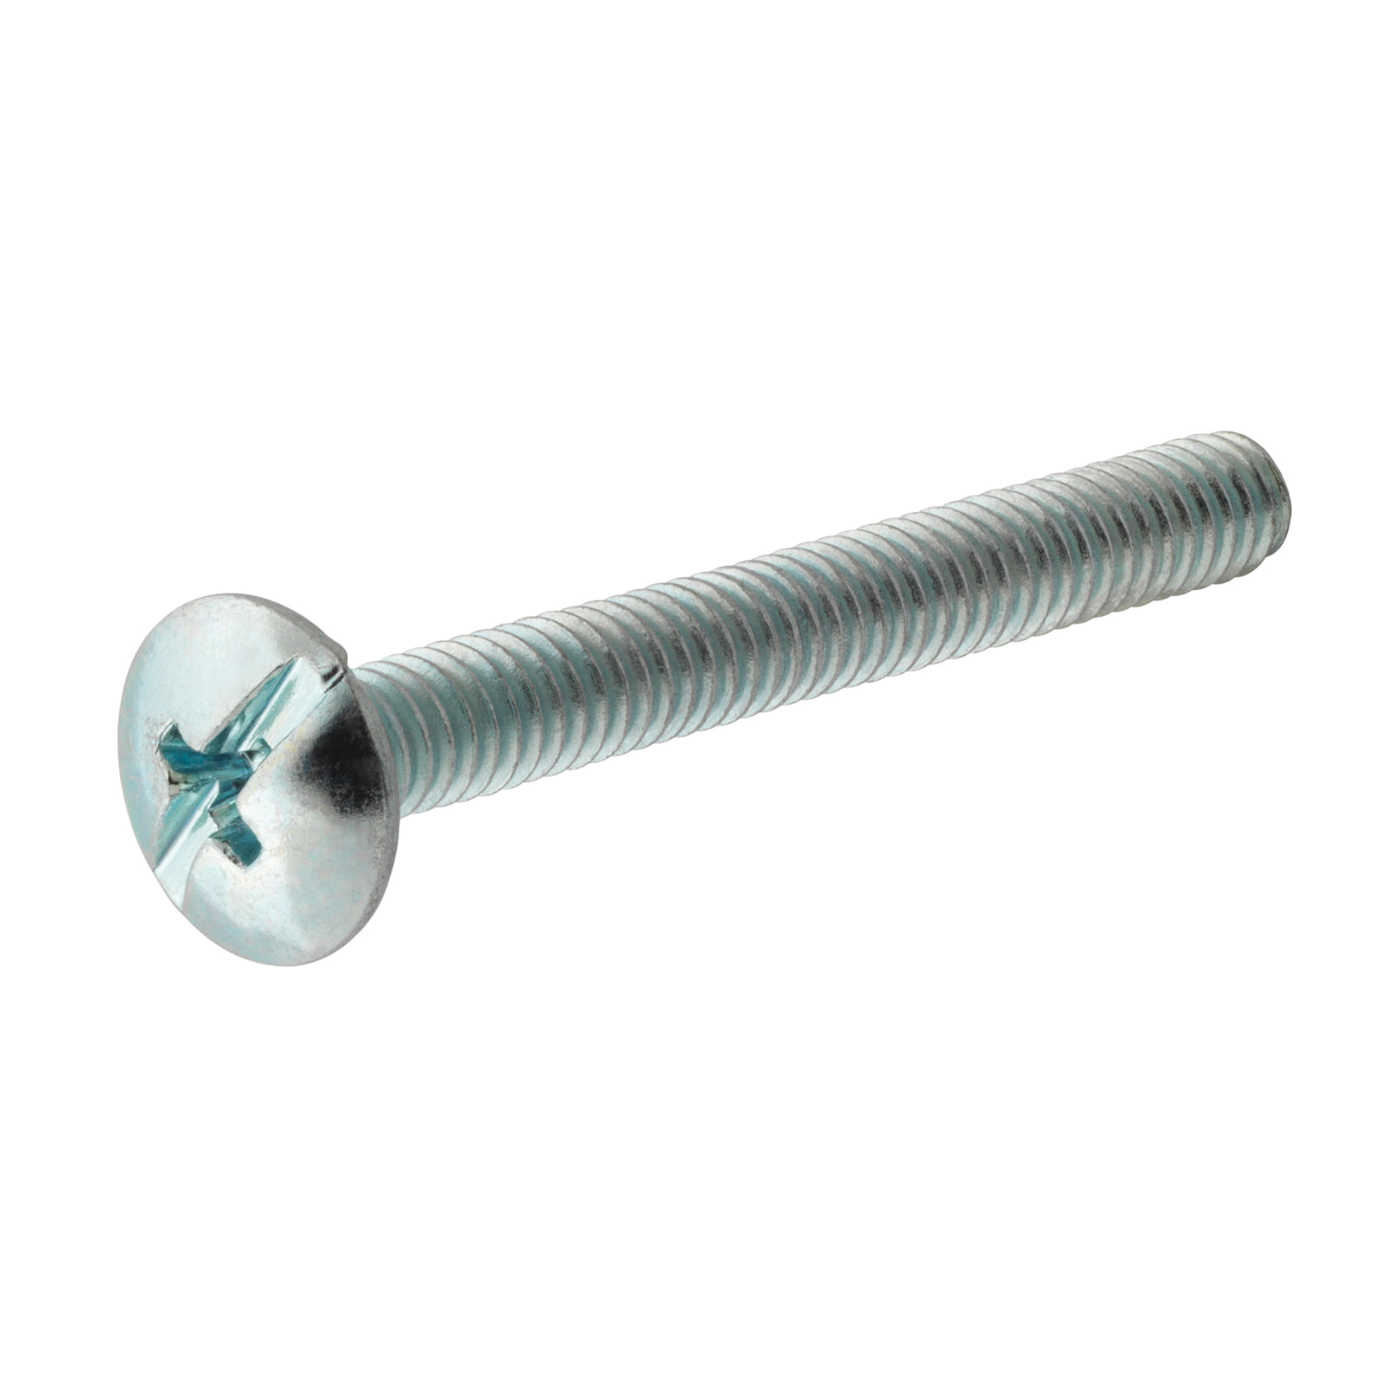 881049 Machine Screw, #8-32 Thread, 1-1/2 in L, Truss Head, Phillips, Slotted Drive, Stainless Steel